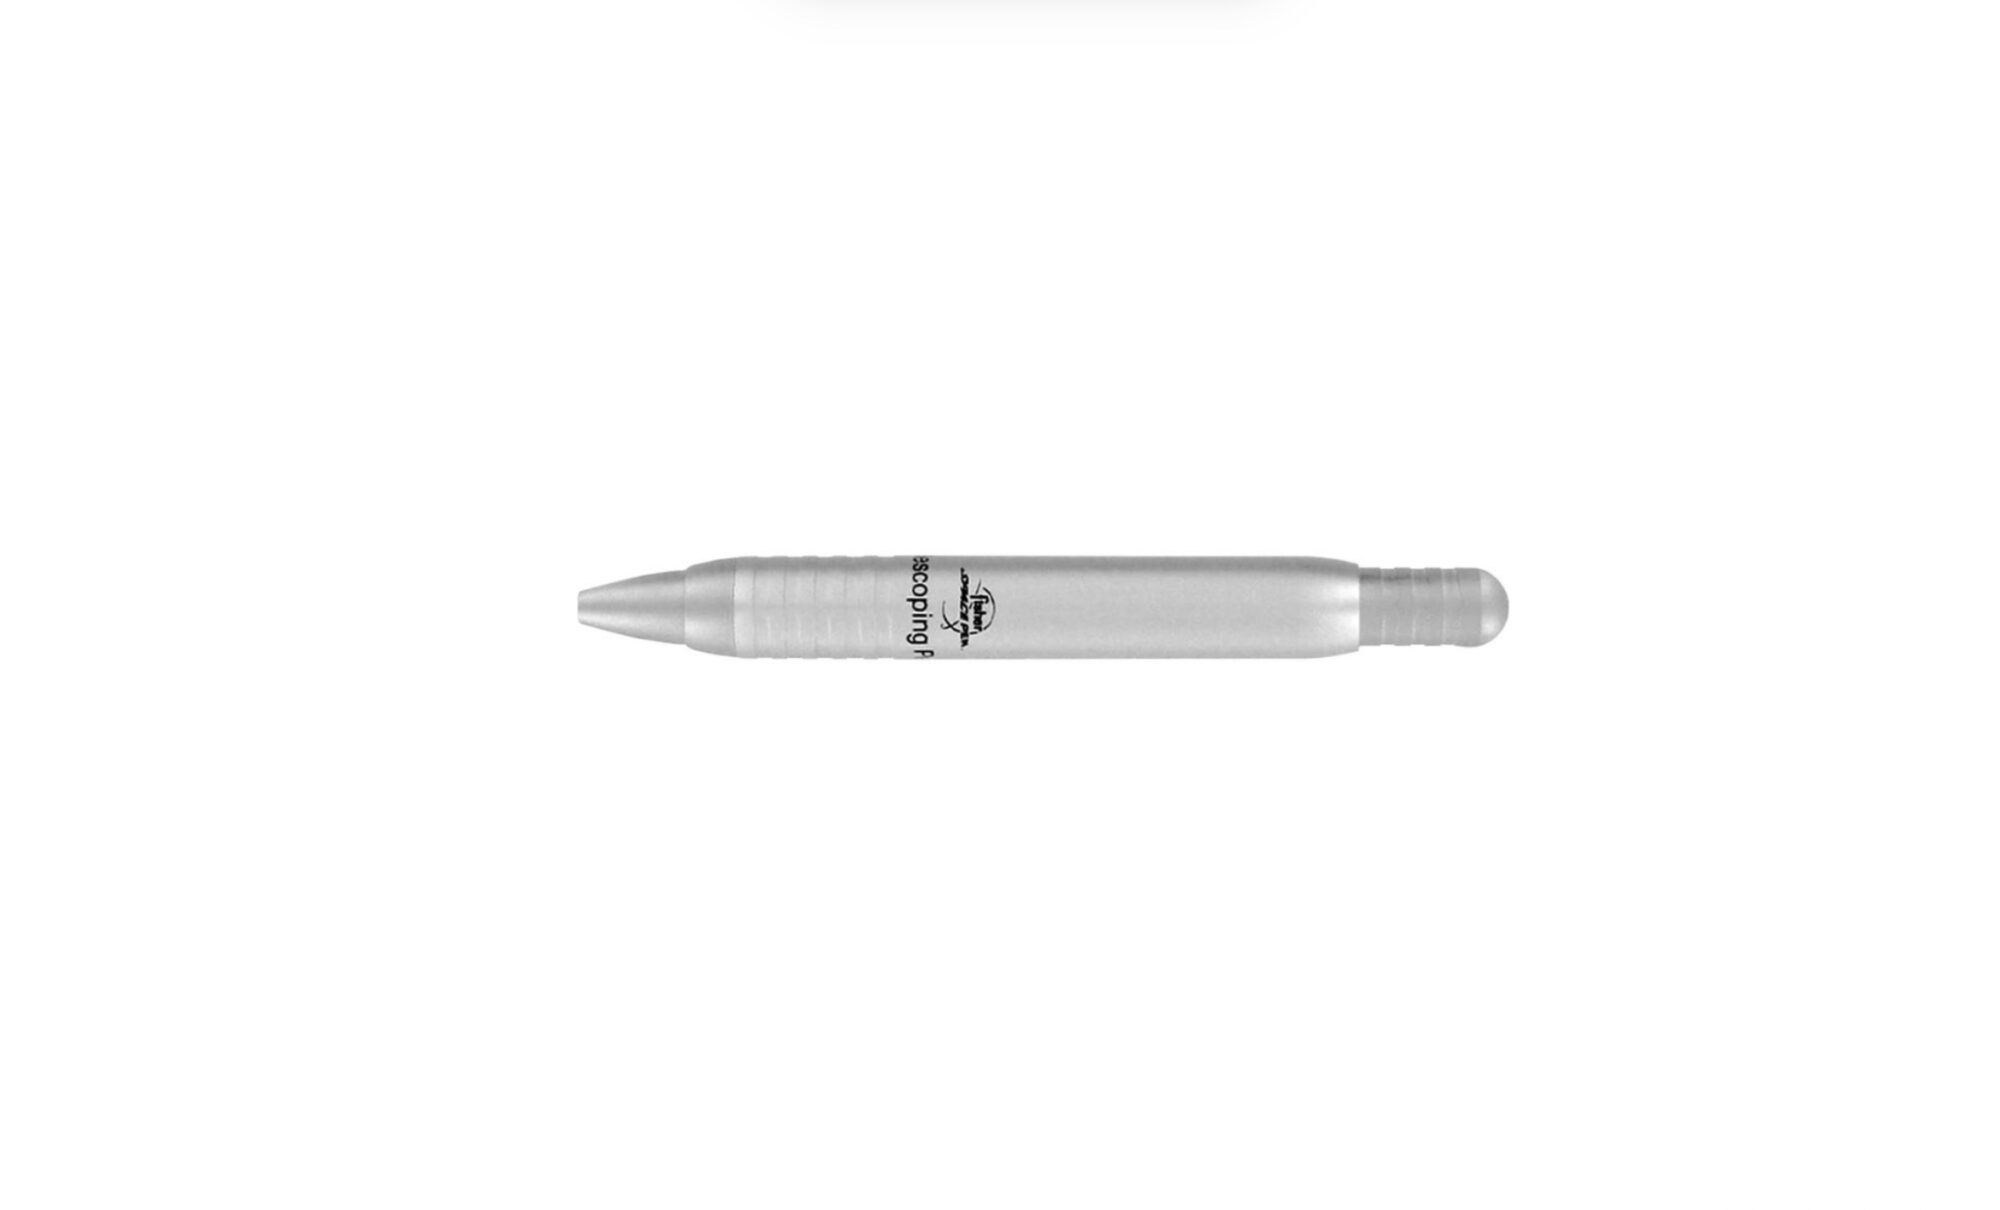 Telescopica closed Fisher Space Pen by Fulker Shop